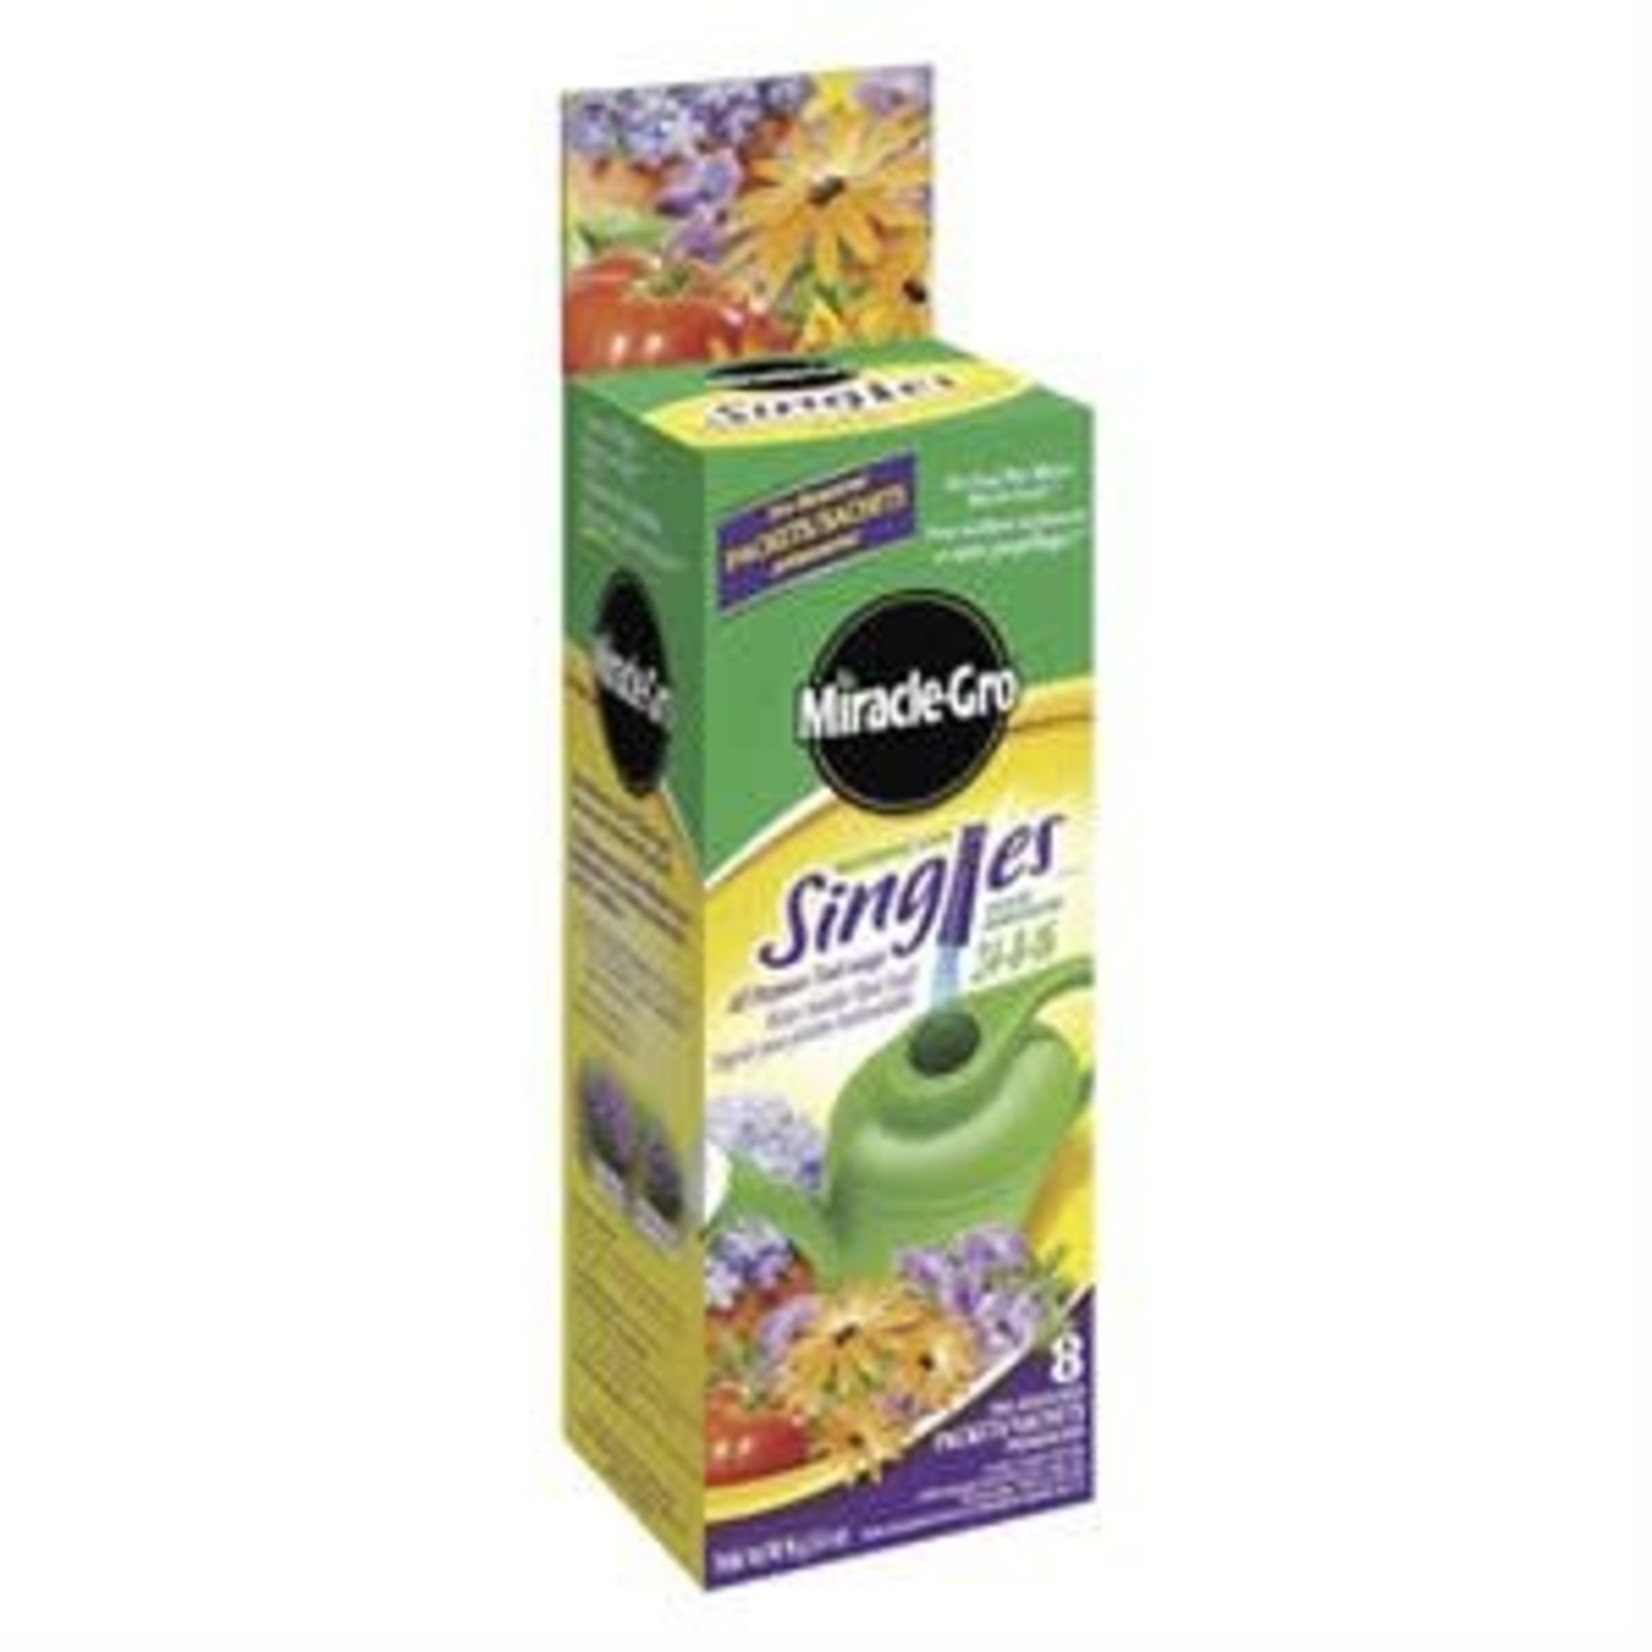 Miracle Gro Miracle-Gro Watering Can Singles All Purpose Water Soluble Plant Food 24-8-16  96g - Case - Replaces 1038881